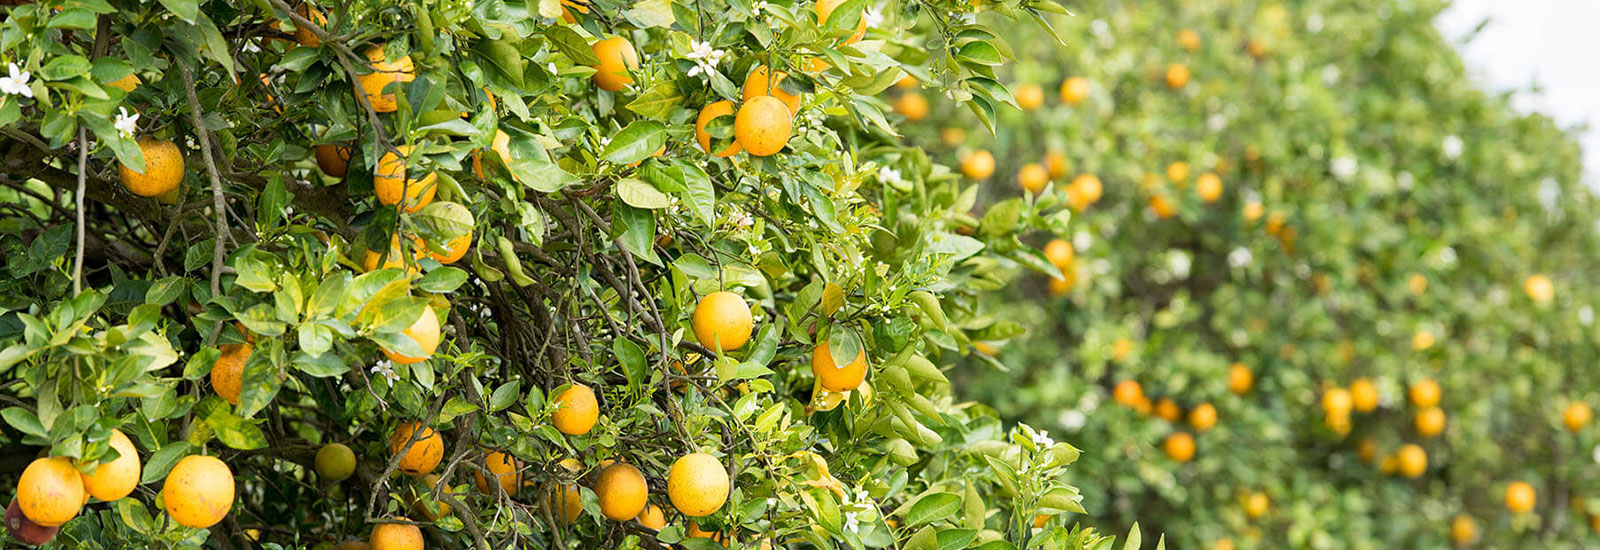 Create citrus varieties resistant or tolerant to Huanglongbing through transgenic and nontransgenic approaches